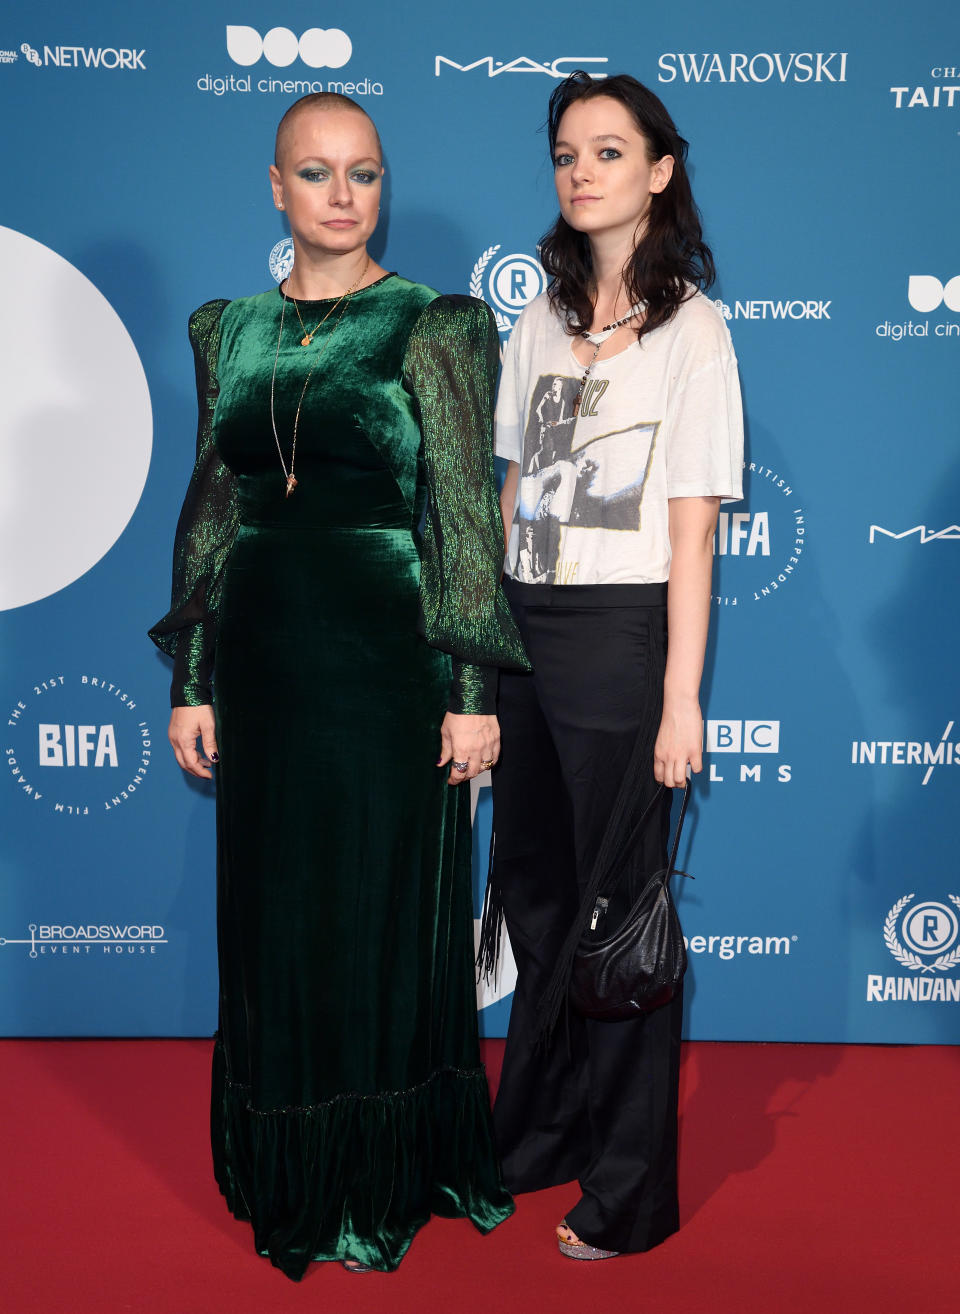 Samantha Morton and Esme Creed-Miles attend the 21st British Independent Film Awards at Old Billingsgate on December 2, 2018 in London, England.  (Photo by Karwai Tang/WireImage)